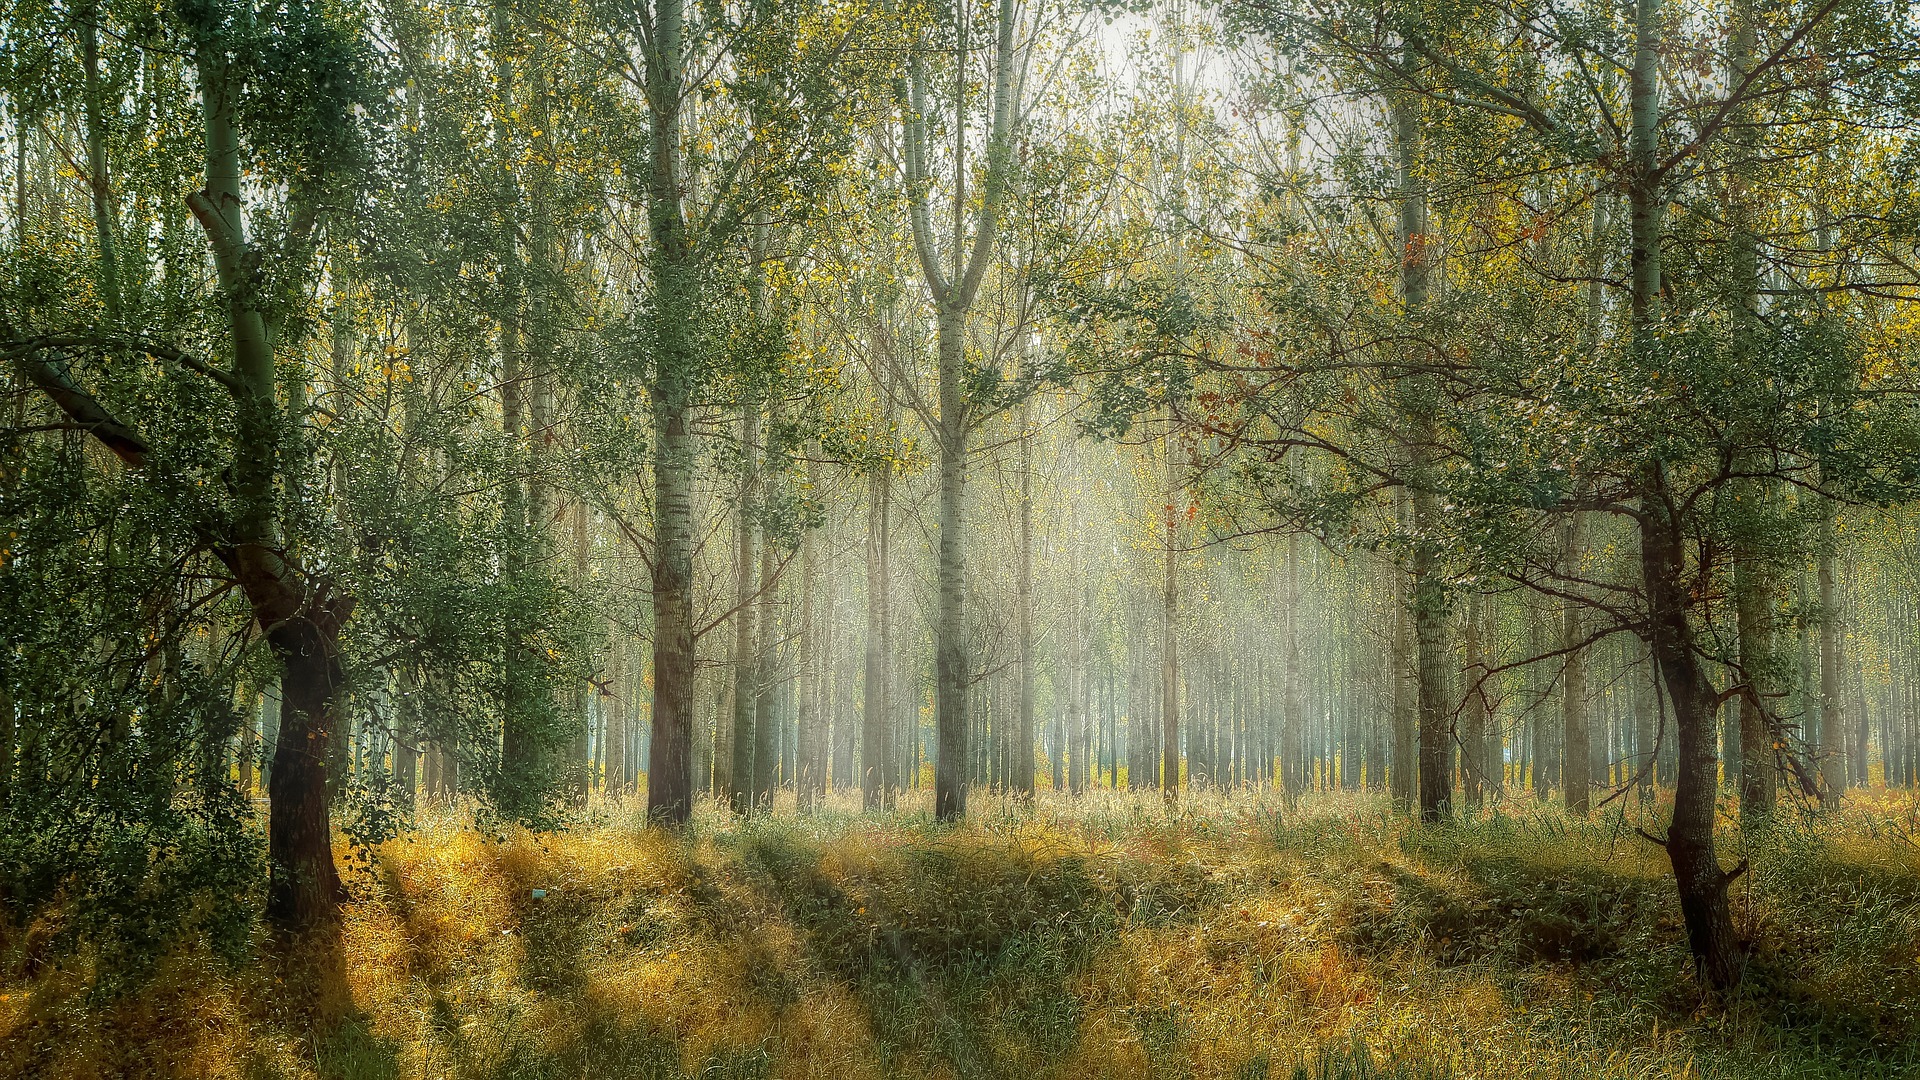 General 1920x1080 forest trees nature sun rays